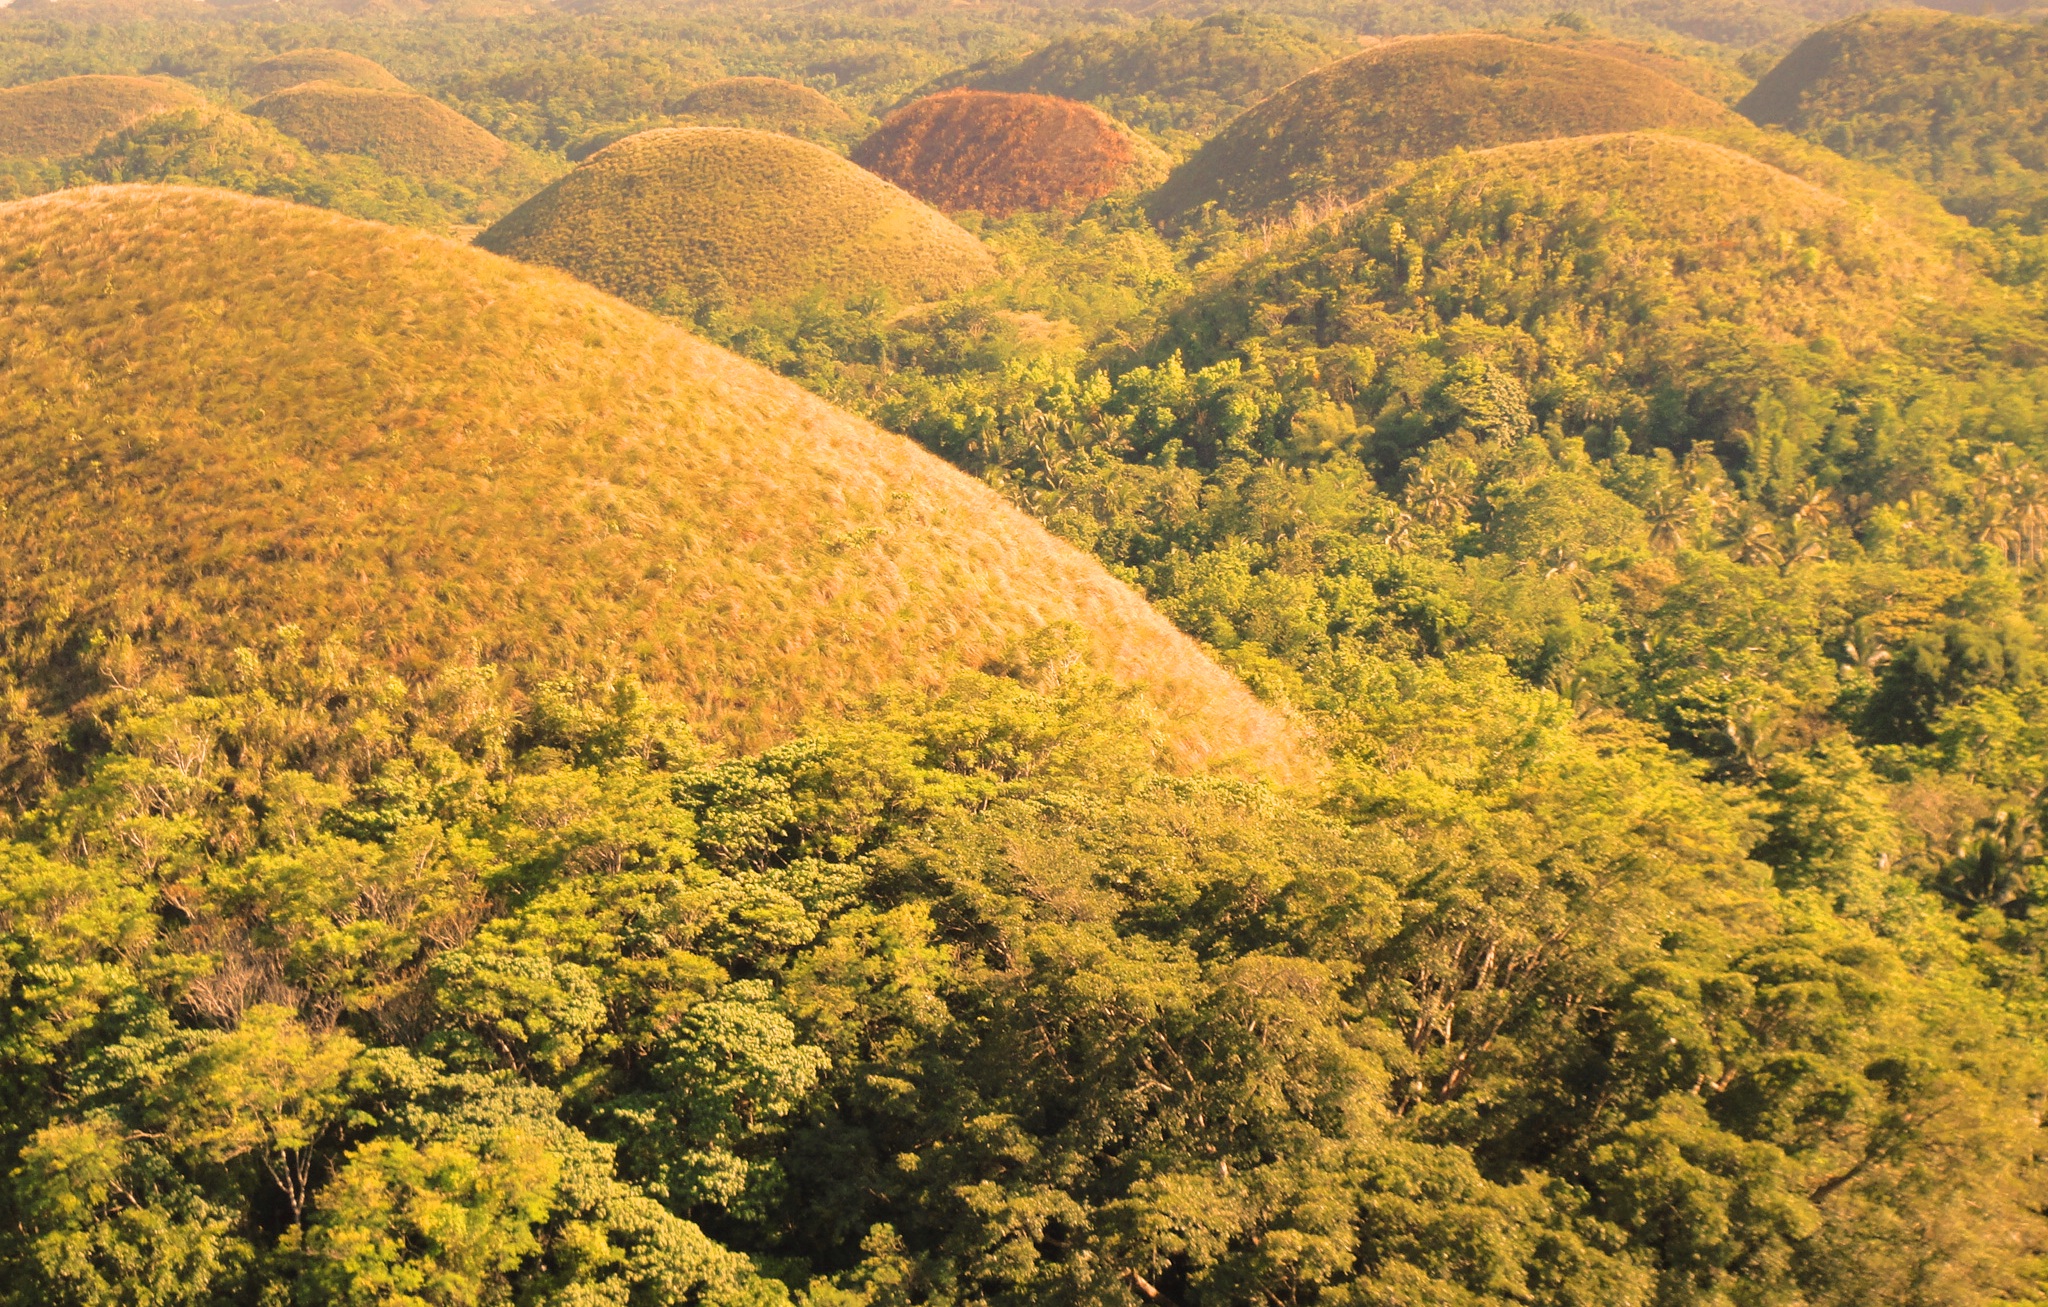 <p>Because of their unique color, the hills have become a famous tourist attraction in the Philippines. They are featured on the provincial flag and have even been called the eighth wonder of the world.</p>